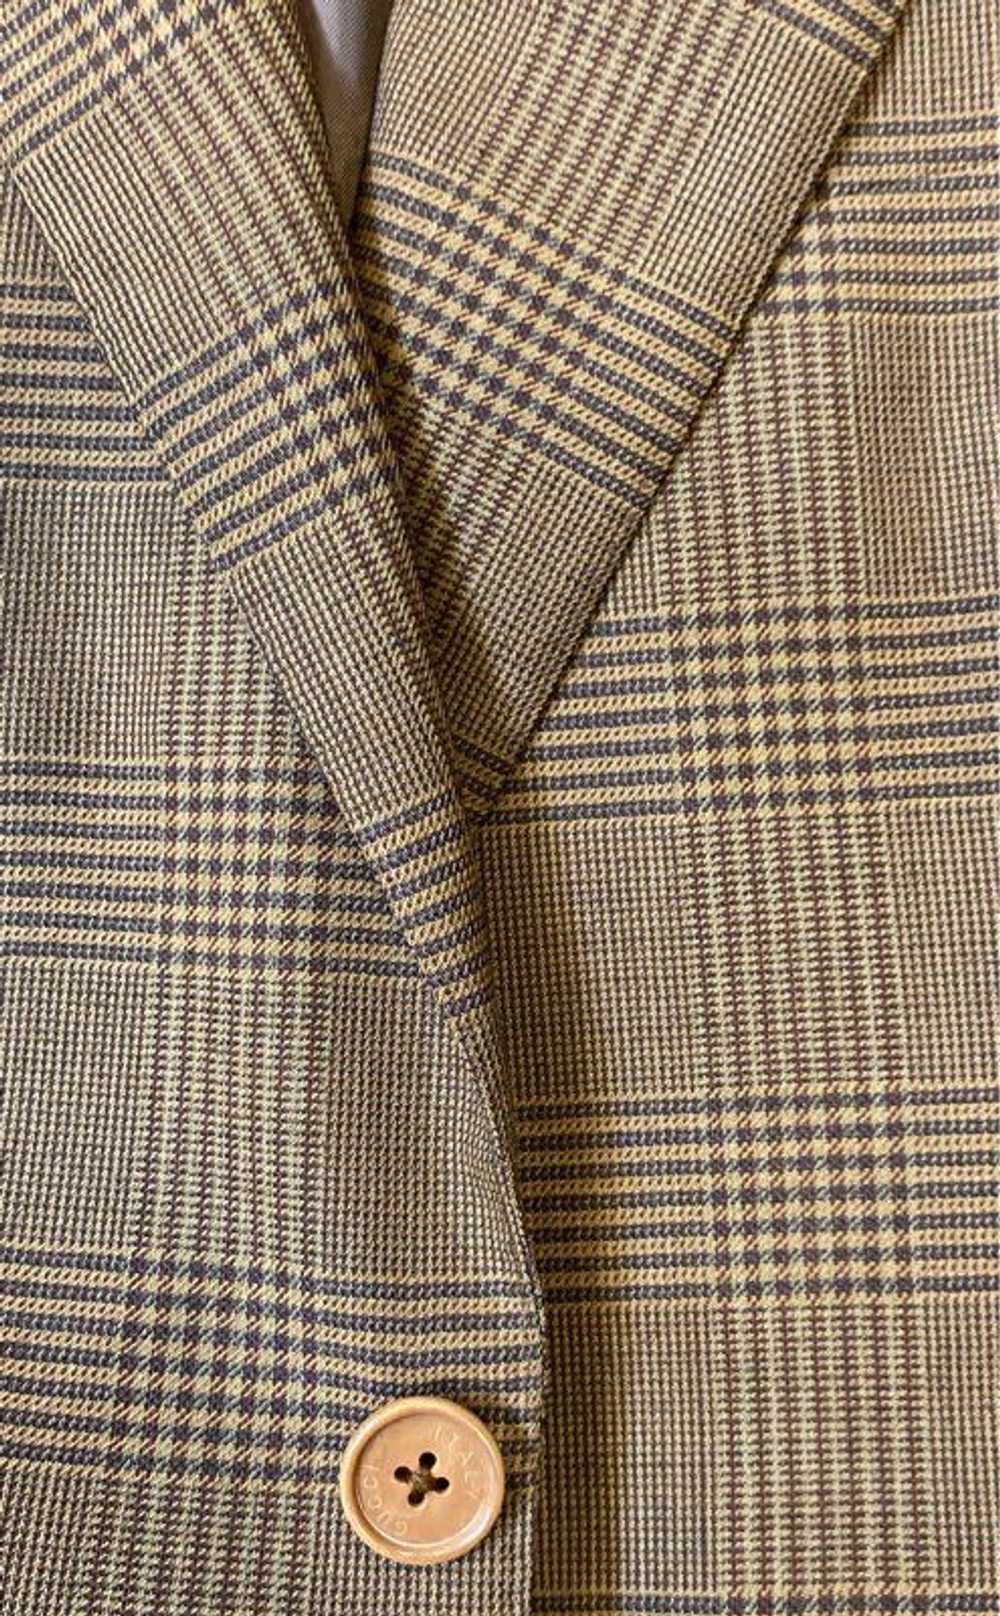 GUCCI Brown Plaid Sports Coat - Size X Large - image 6